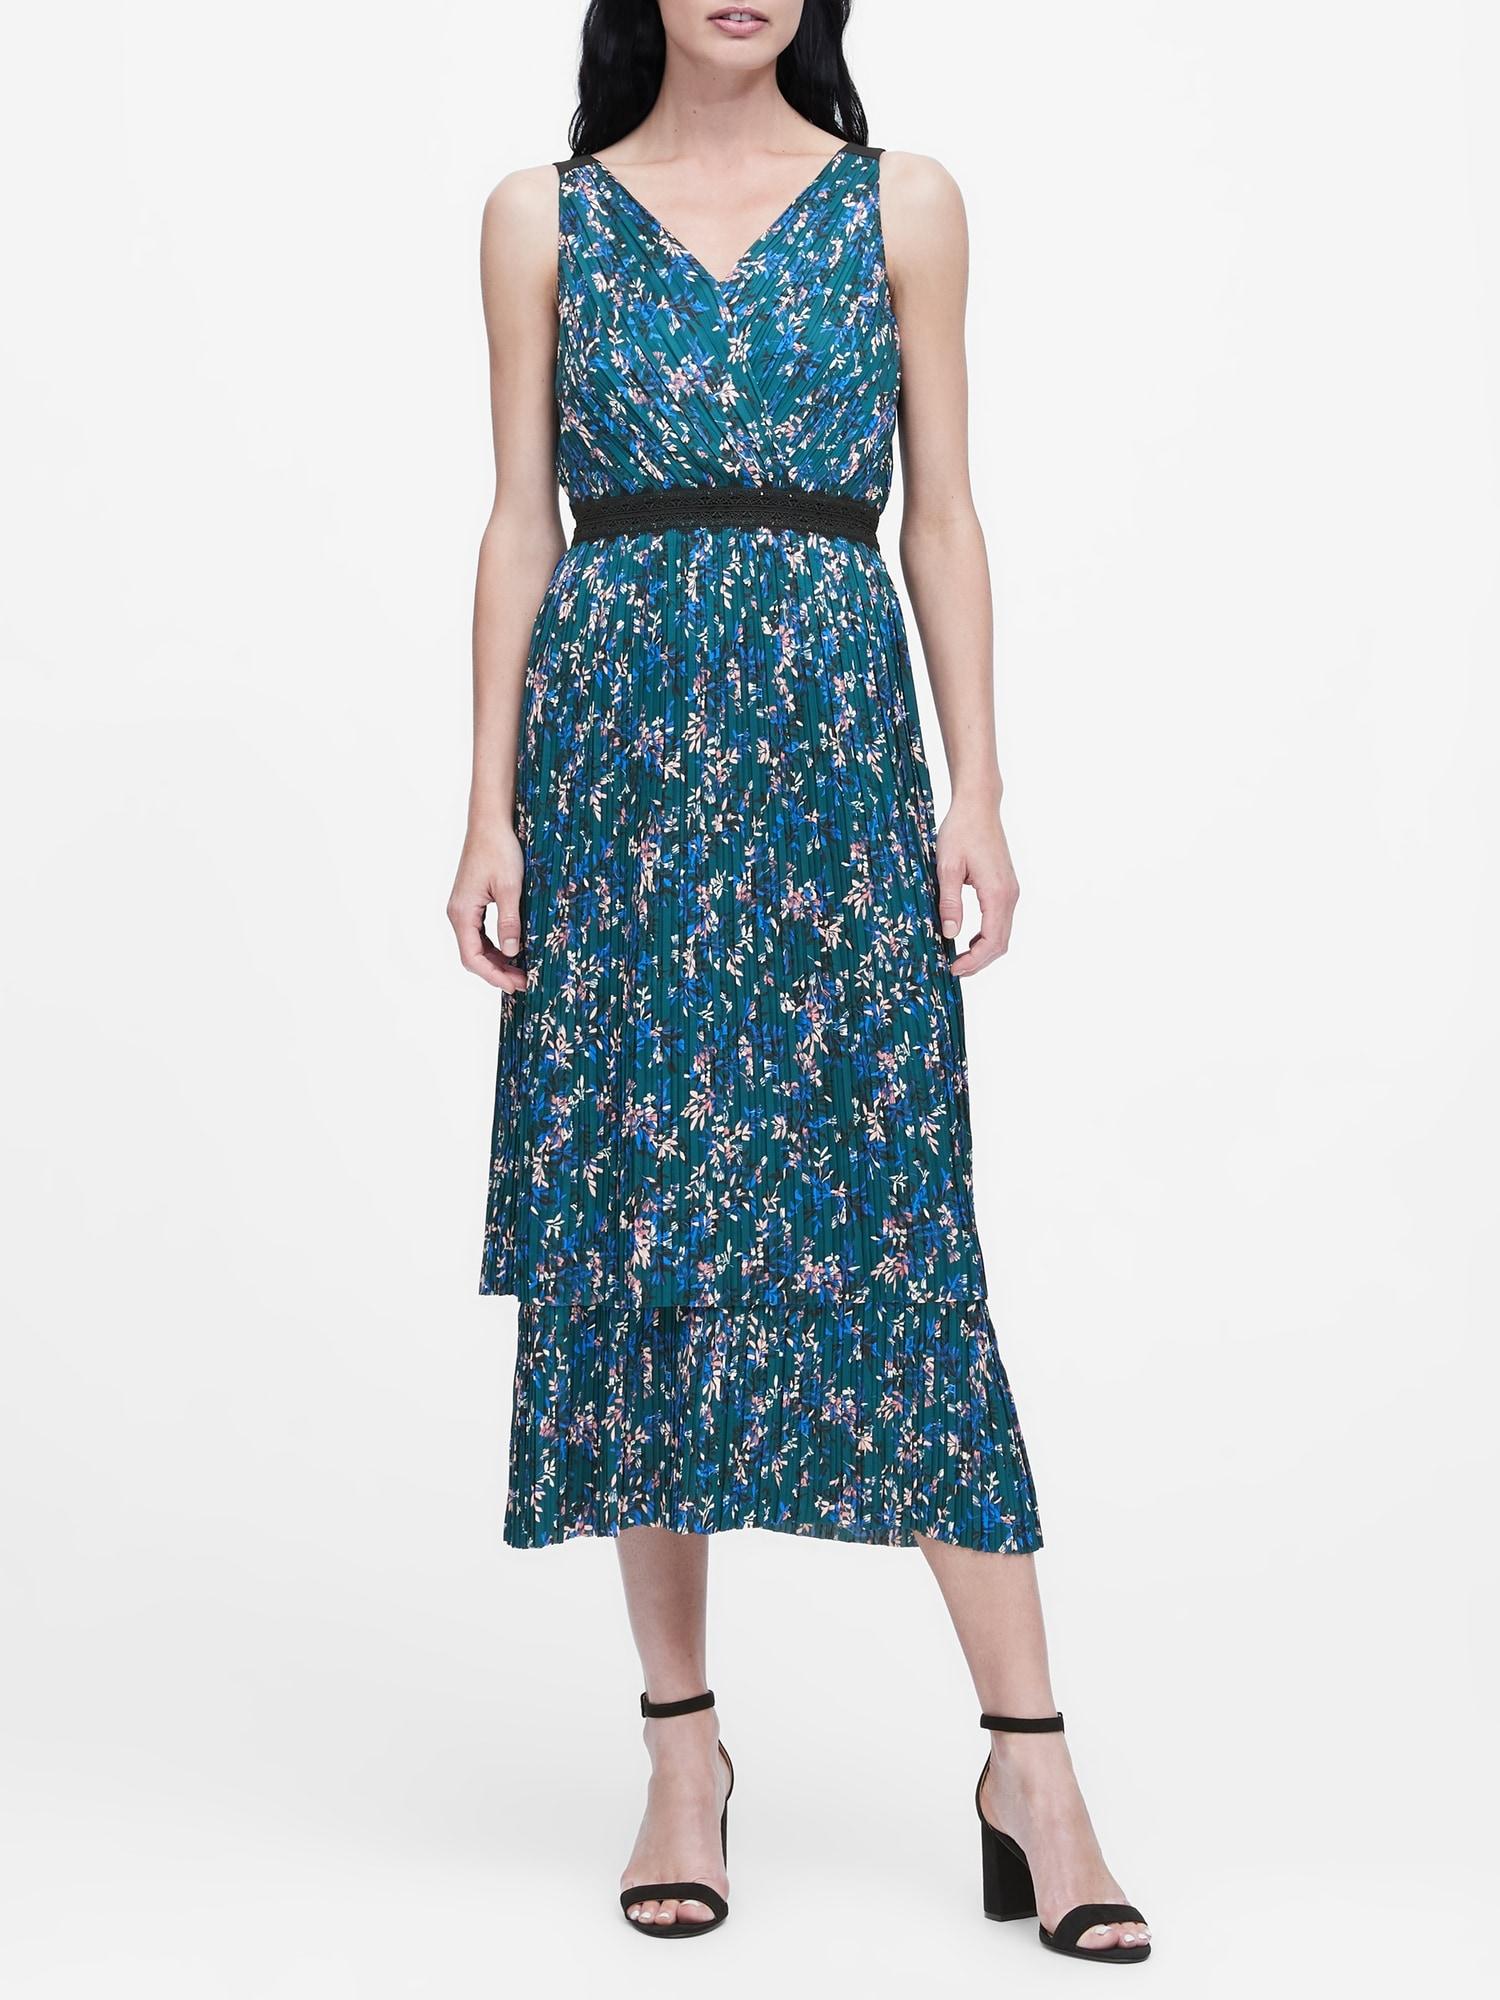 Banana Republic Lace Petite Pleated Tiered Midi Dress in Teal Green